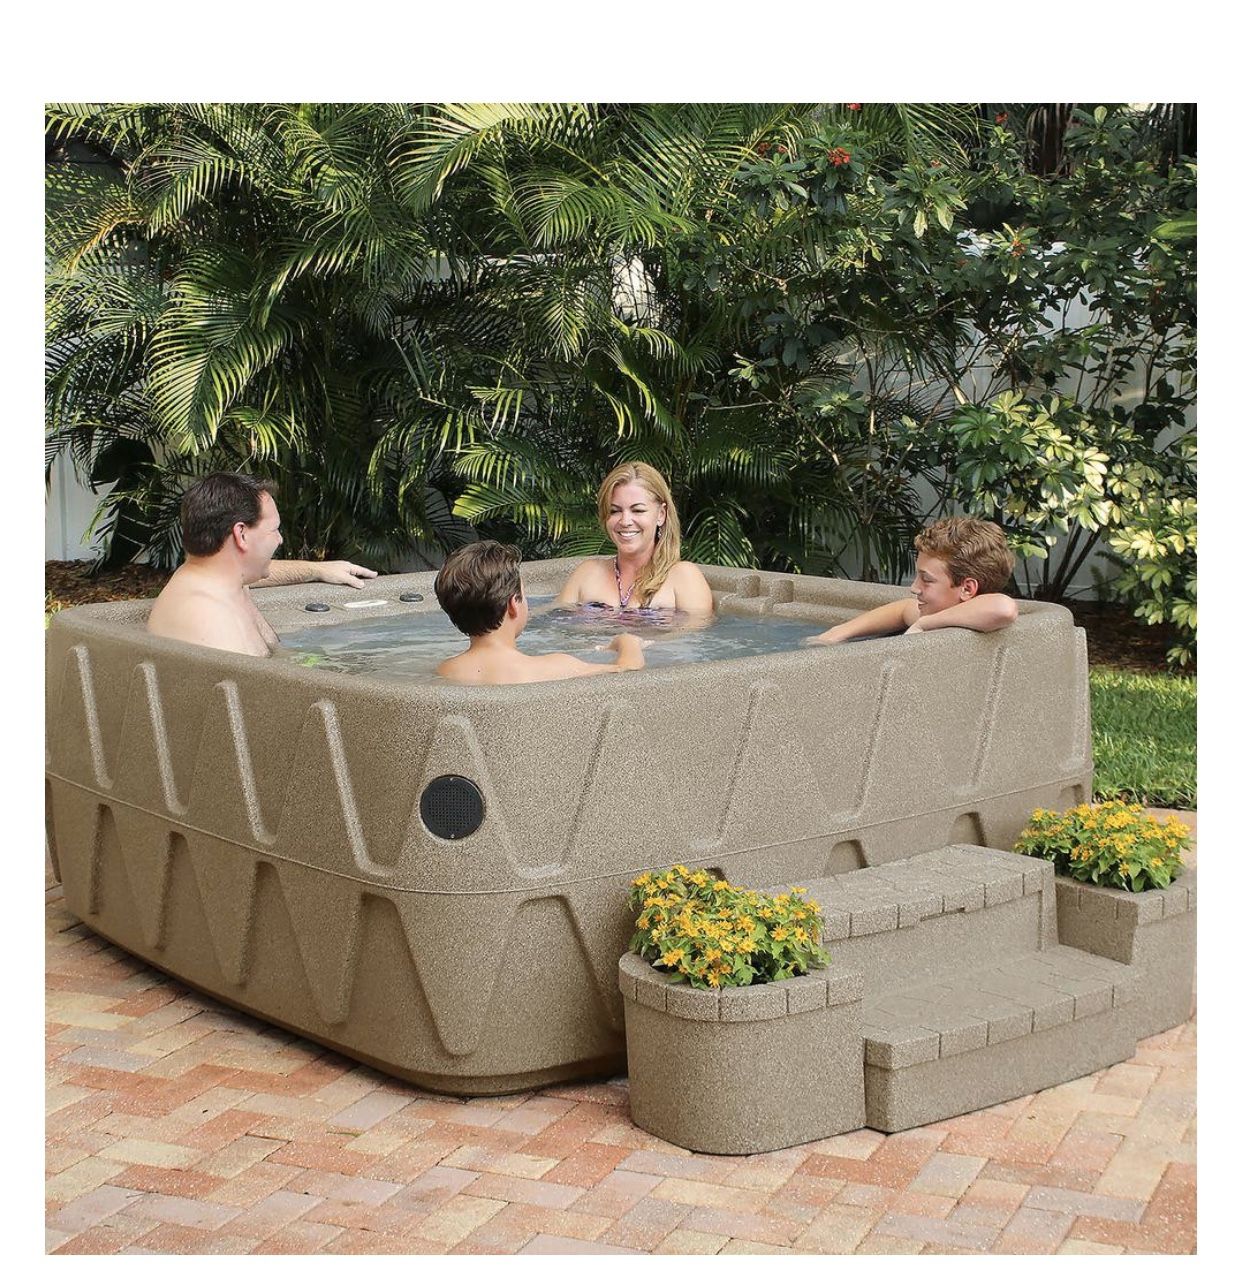 AquaRest Spa/Hot tub 5 person 29 stainless steel jets